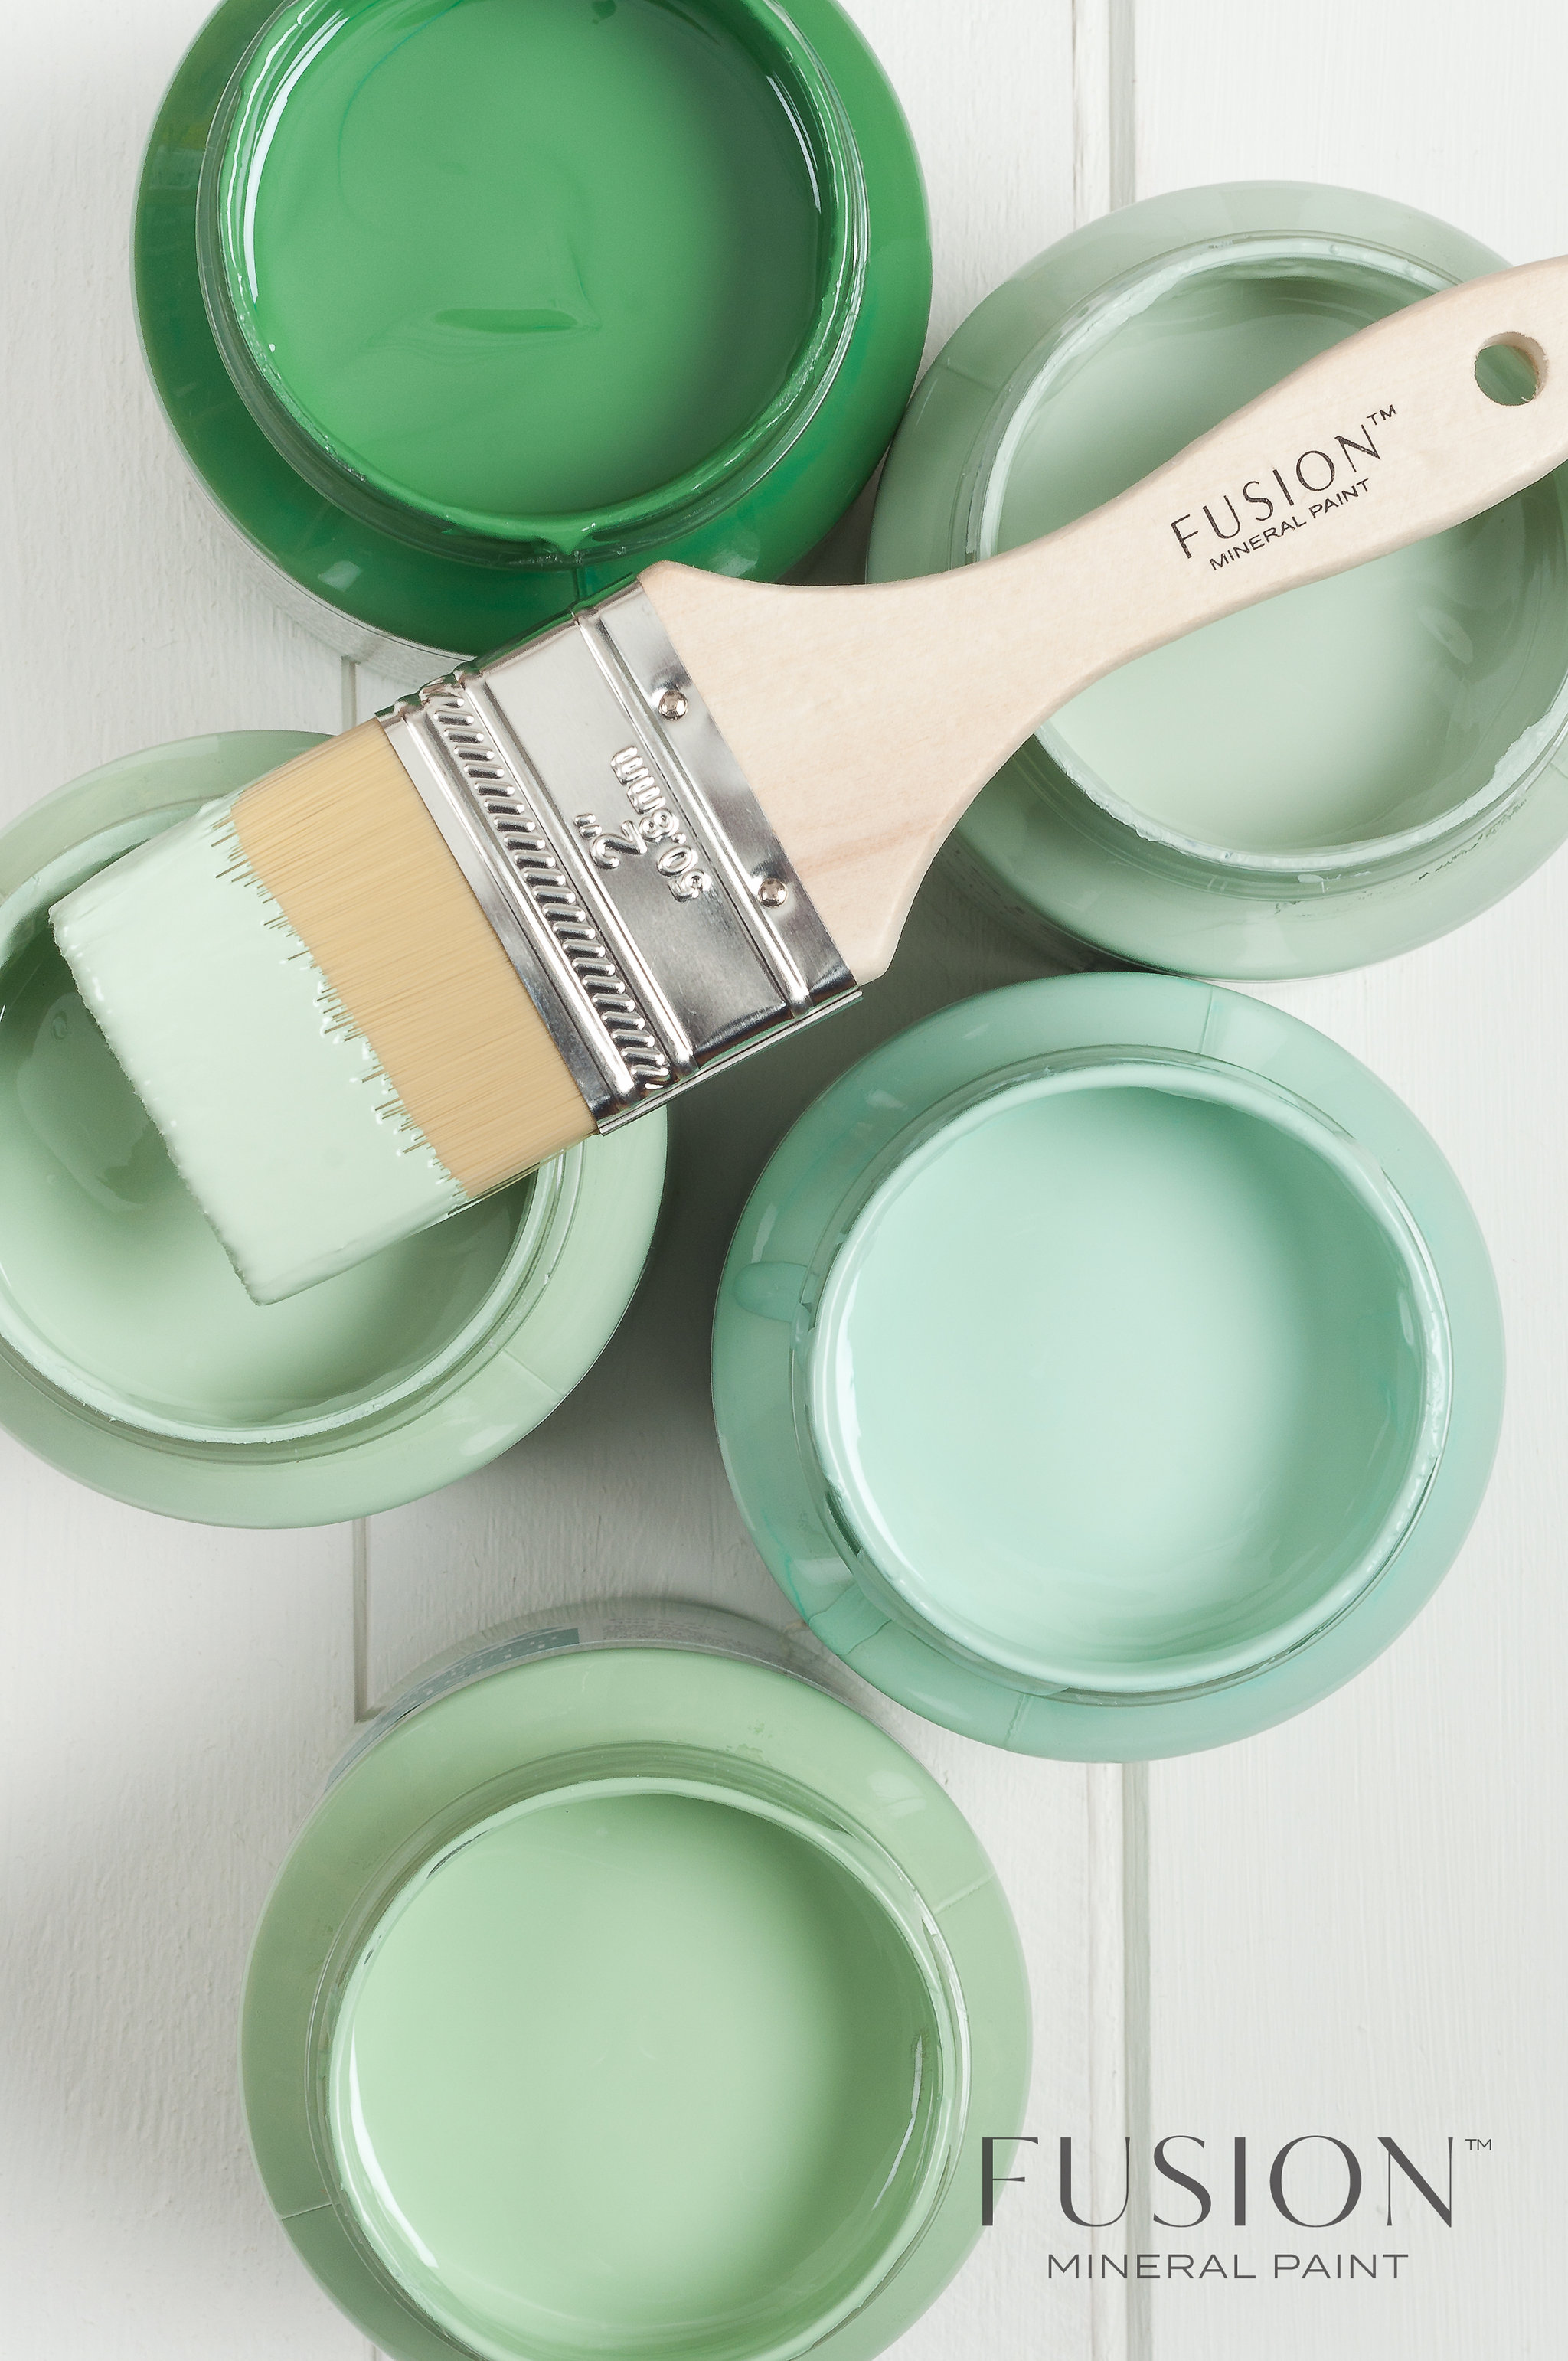 Park Bench Fusion Mineral Paint Goed Gestyled Brielle